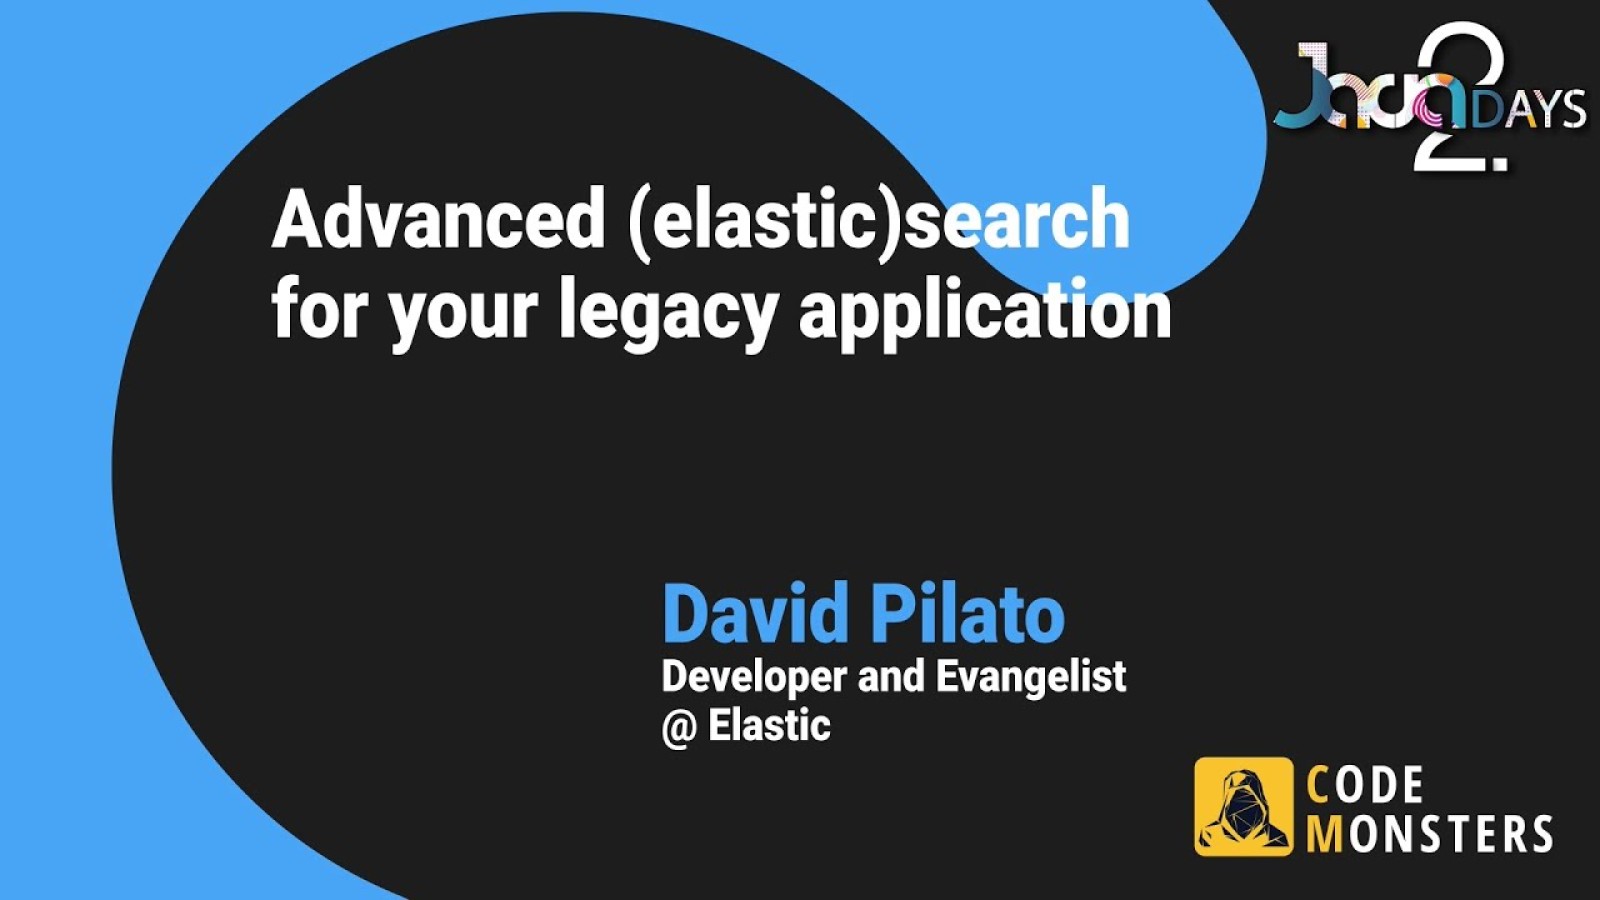 Advanced (elastic)search for your legacy application